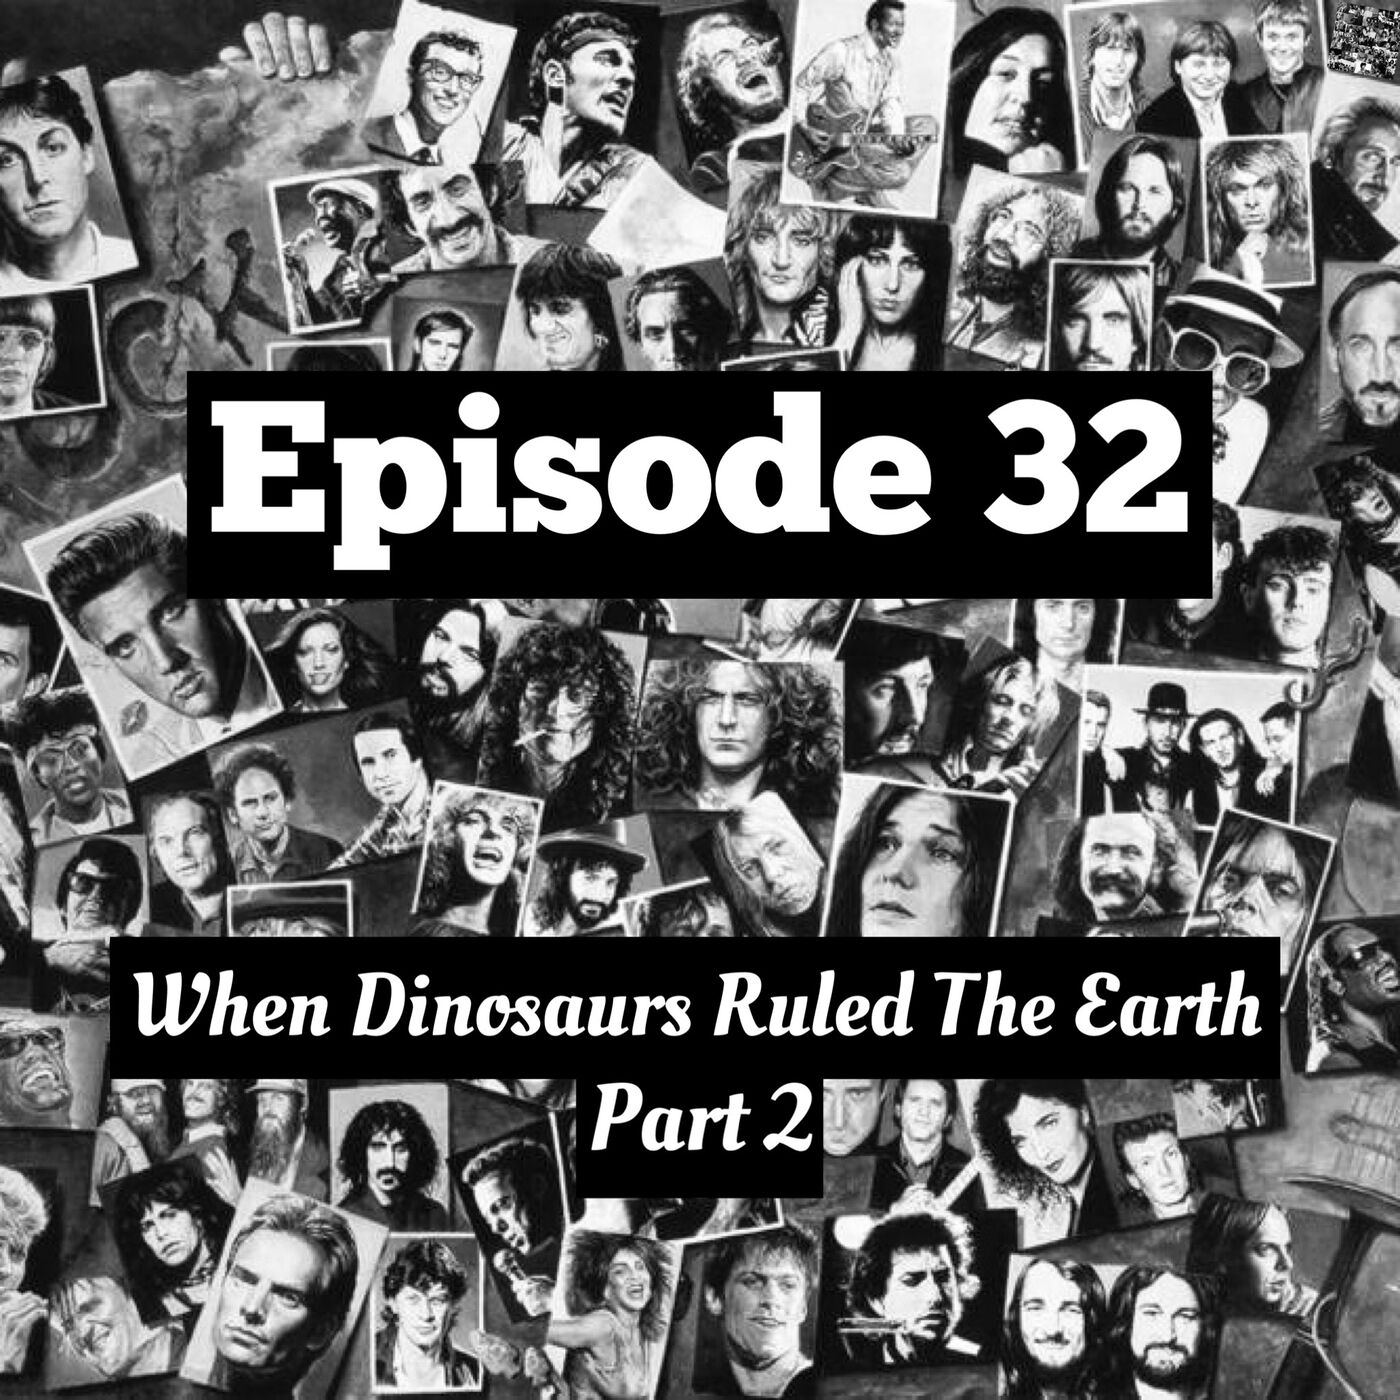 32. When Dinosaurs Ruled The Earth - Part 2